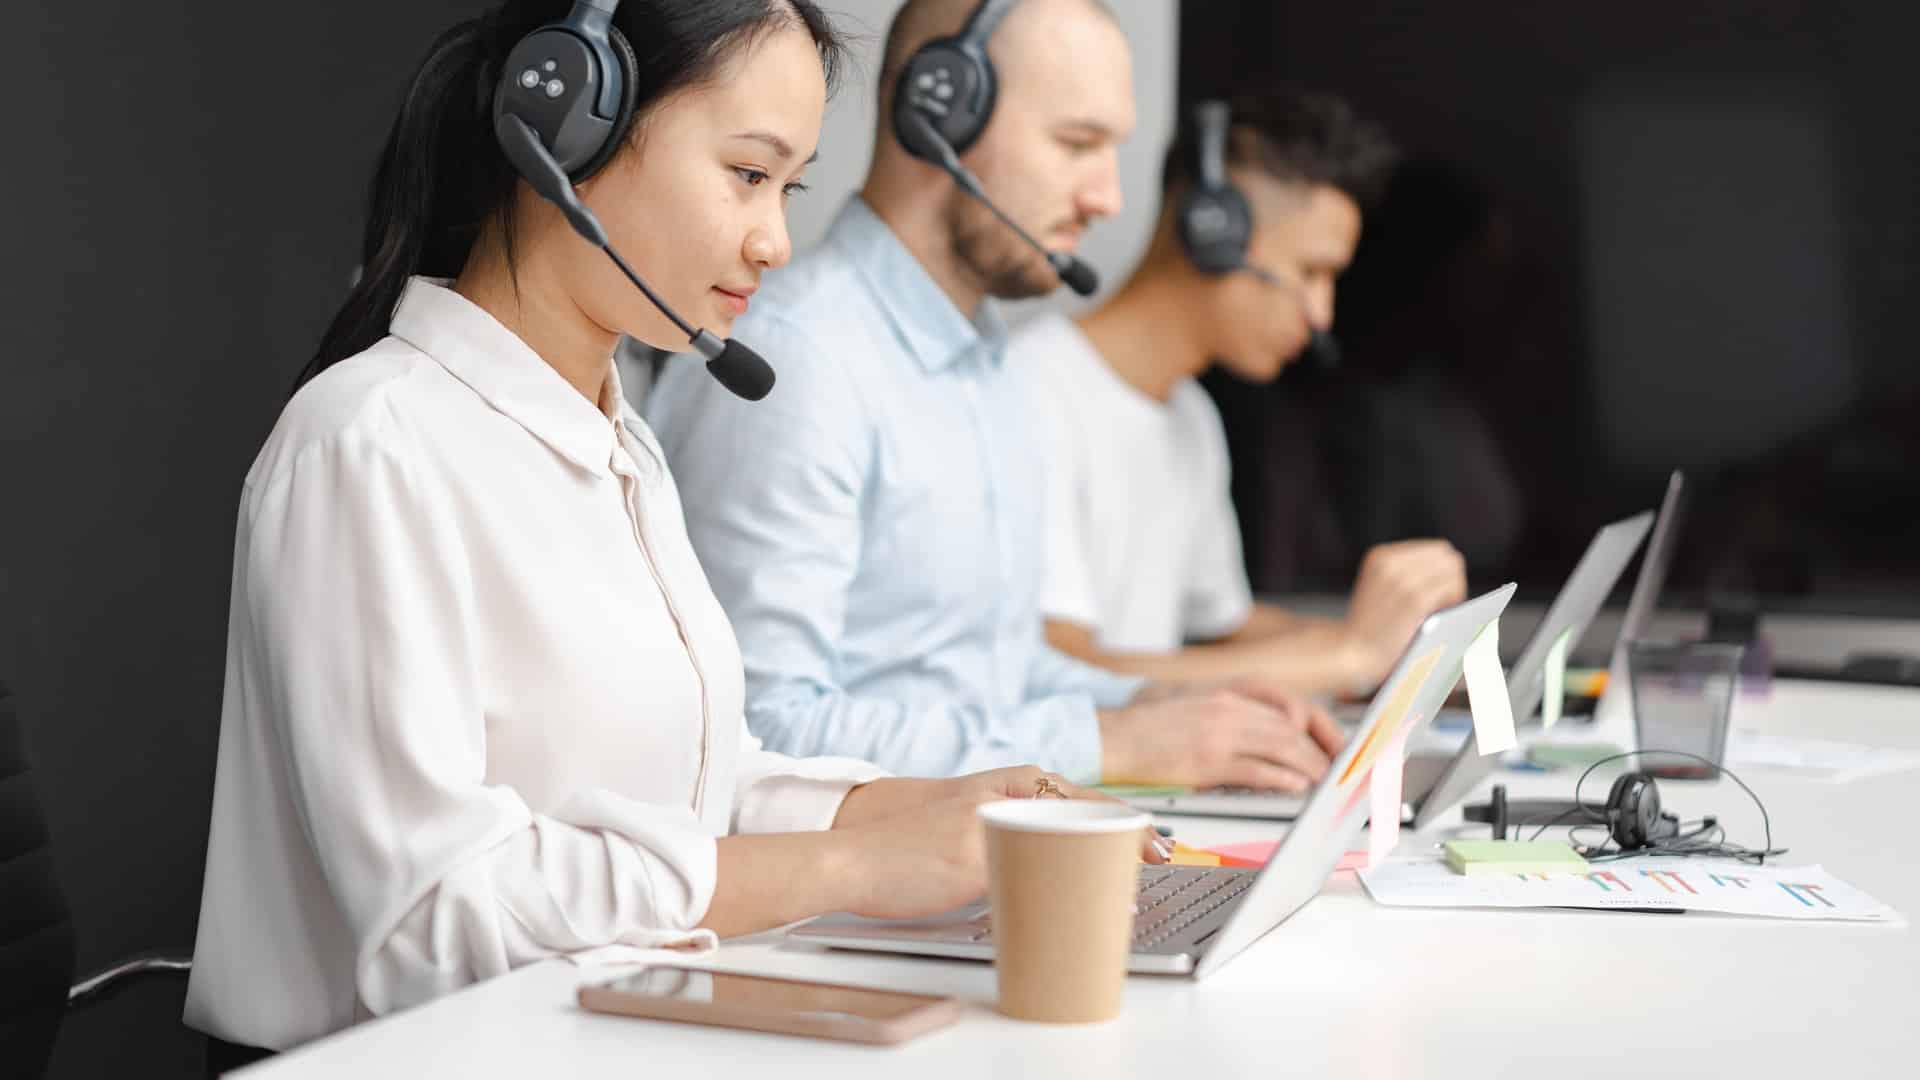 Rezo.ai automates voice calls in contact centers to deliver 2.5x more efficiency